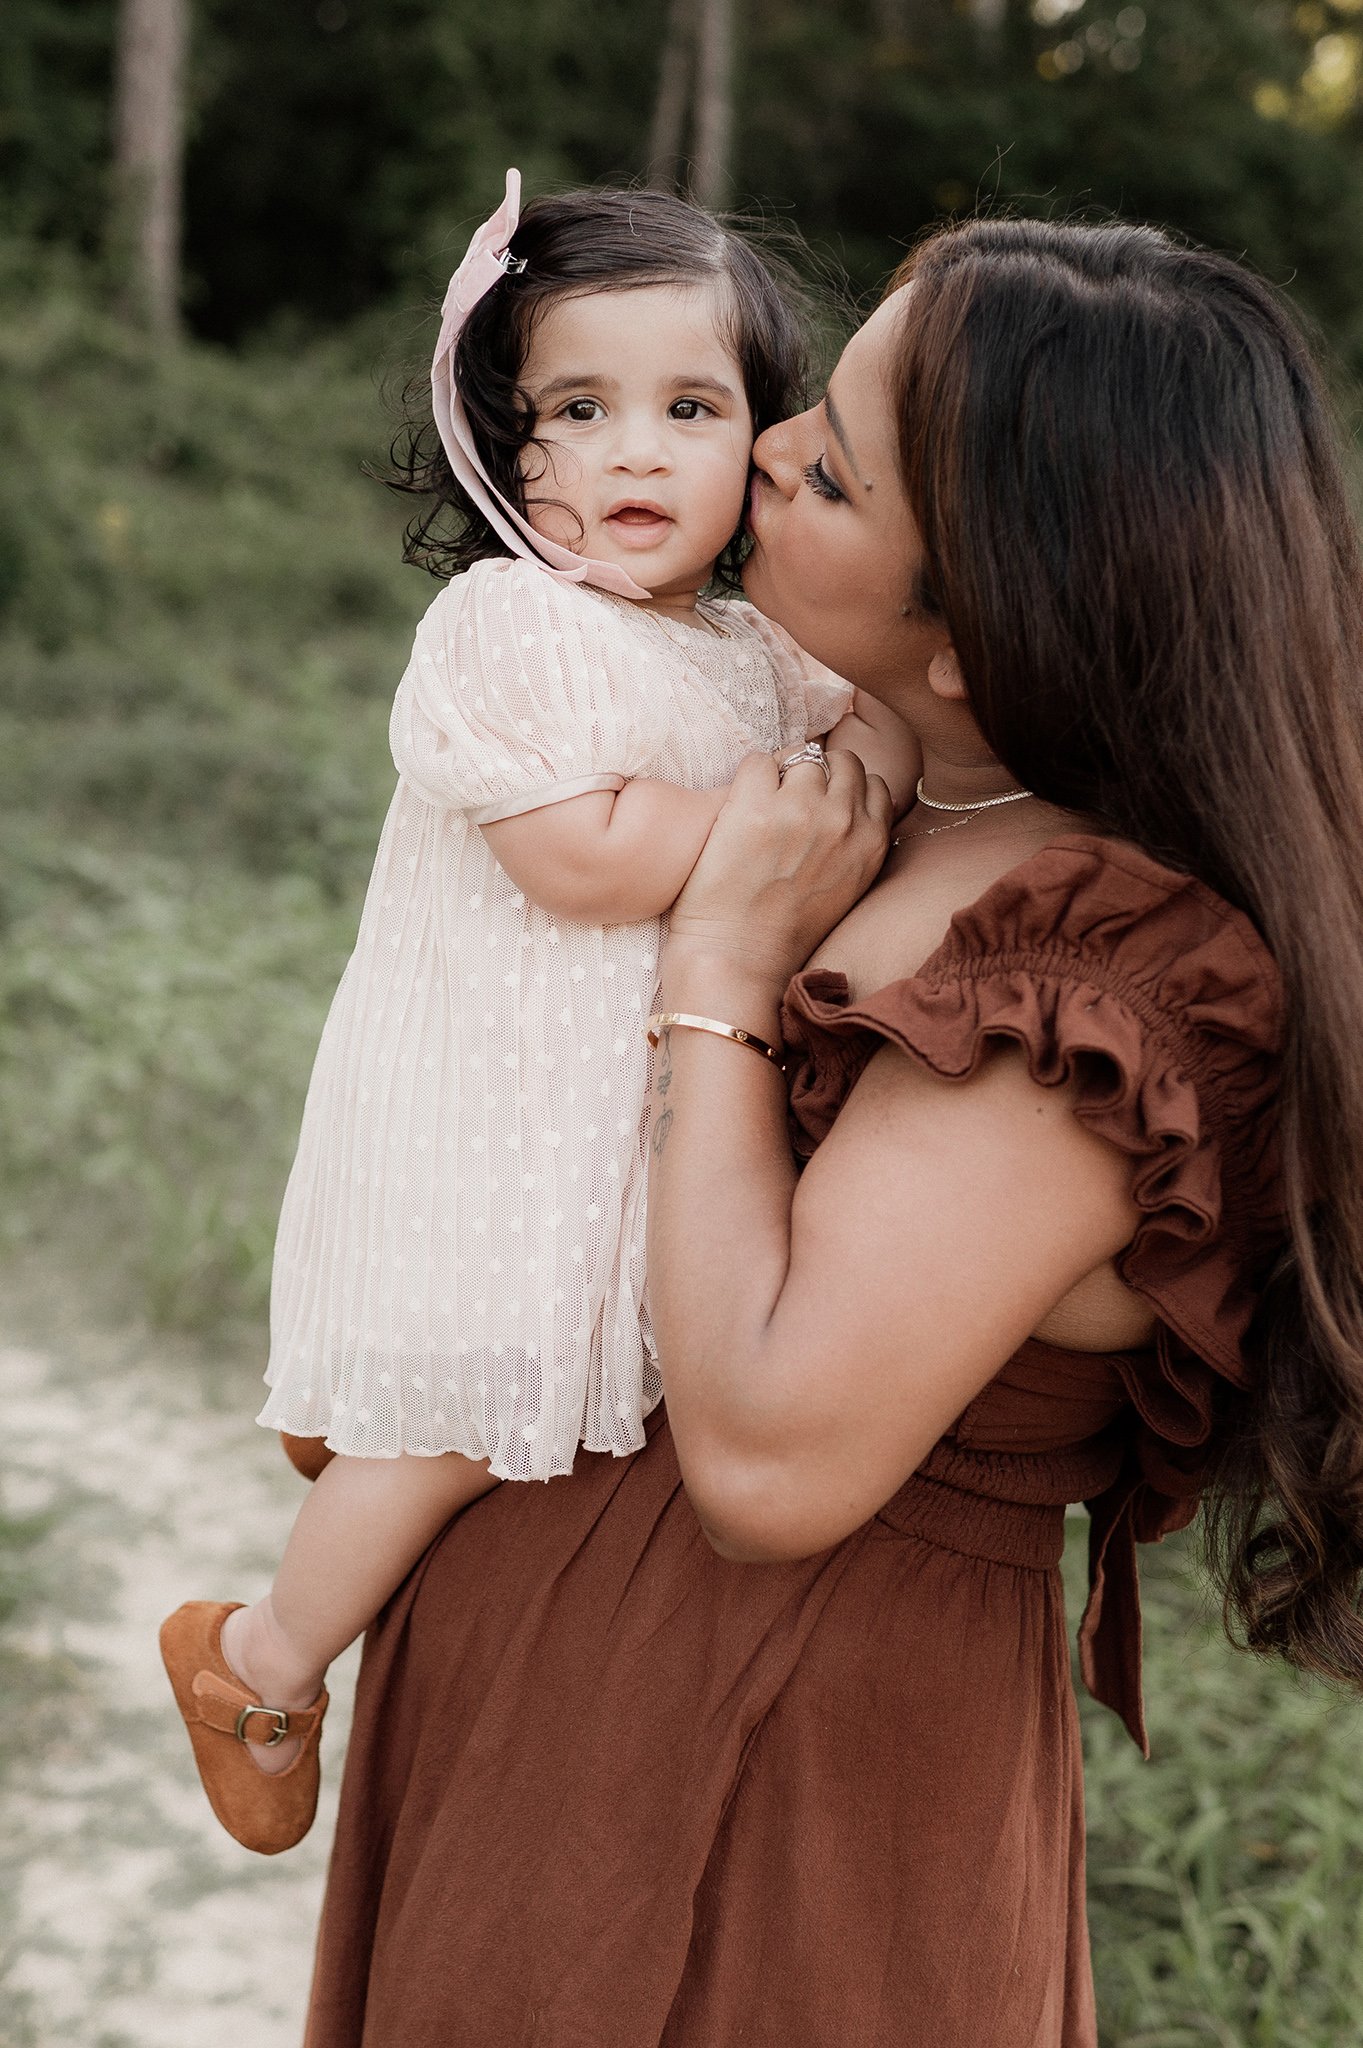 the woodlands family photographer _ conroe photographer _ houston family photographer _ ashley gillen photography _ texas family photographer _ conroe wedding photographer _ conroe texas _ cshi10.jpg